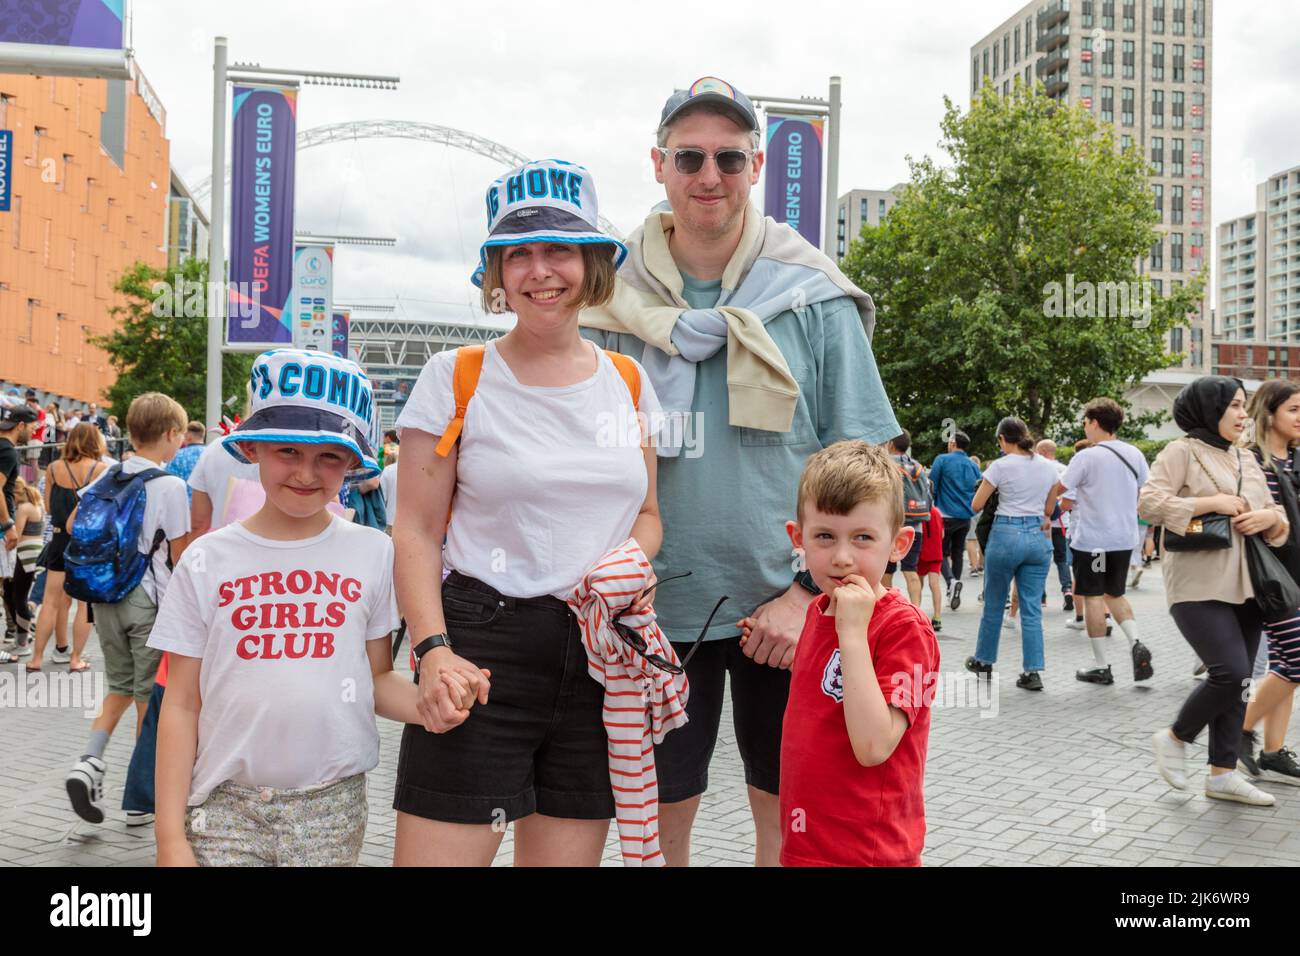 Wembley Stadium, London,UK. 31st July 2022.Football fans gather on Olympic Way ahead of the UEFA Womens Euro 2022 Final between England and Germany at Wembley Stadium.  Today's match is very much a family affair, with many young children able to enjoy the atomsphere since the surround areas are a no alcohol zone following the events of last years Mens Euro Finals. Amanda Rose/Alamy Live News Stock Photo